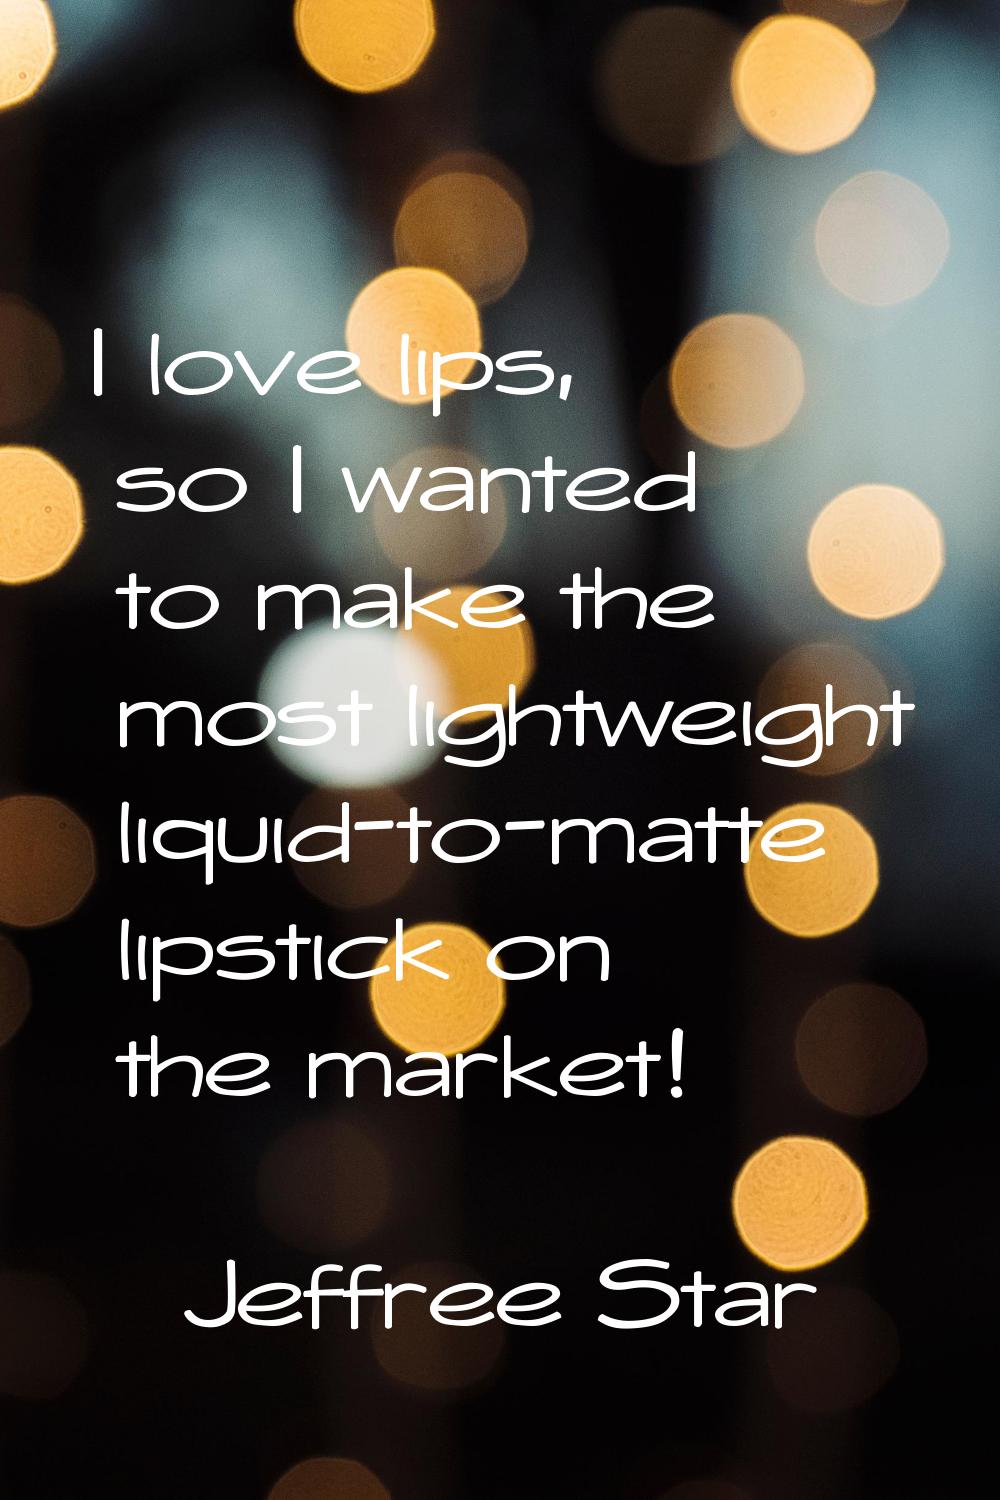 I love lips, so I wanted to make the most lightweight liquid-to-matte lipstick on the market!